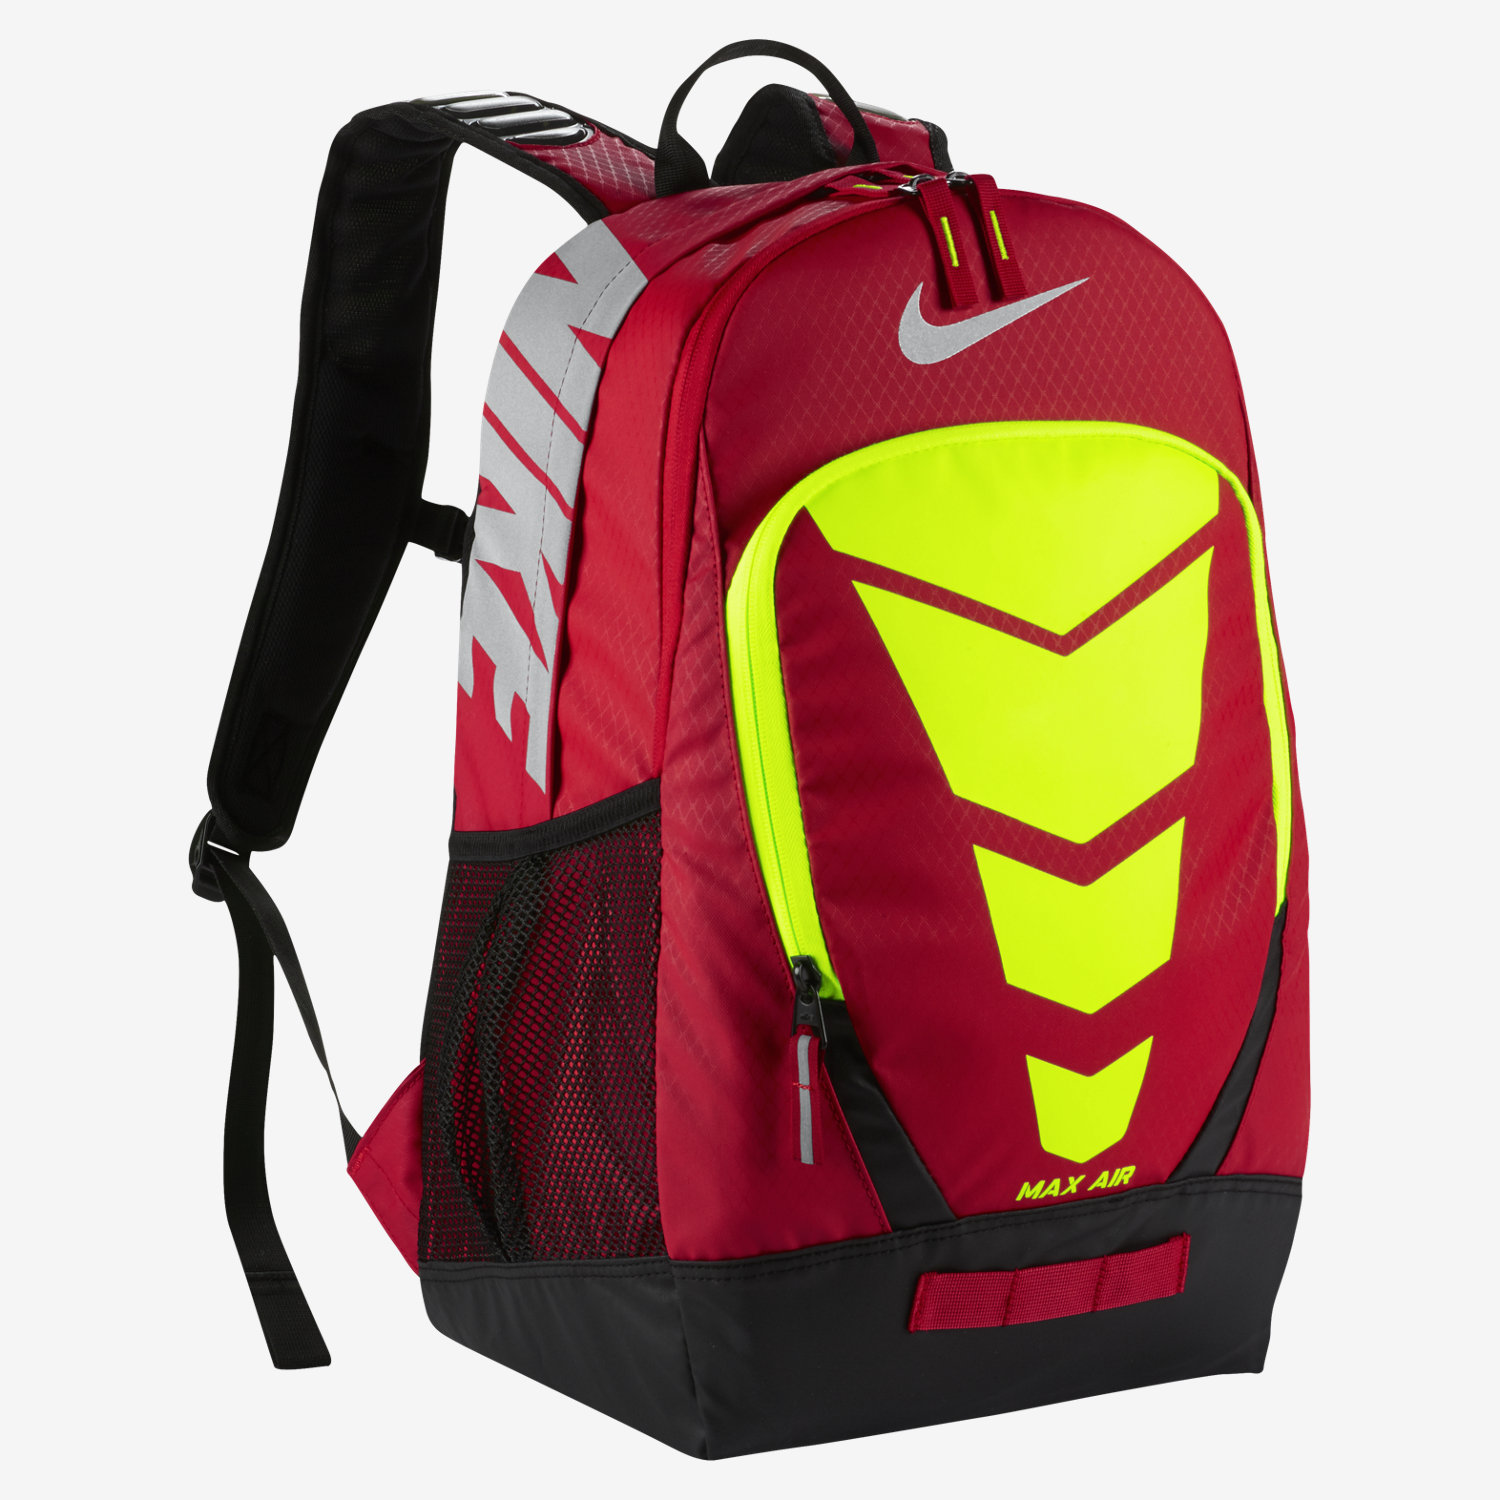 nike max air backpack lowest price Sale 